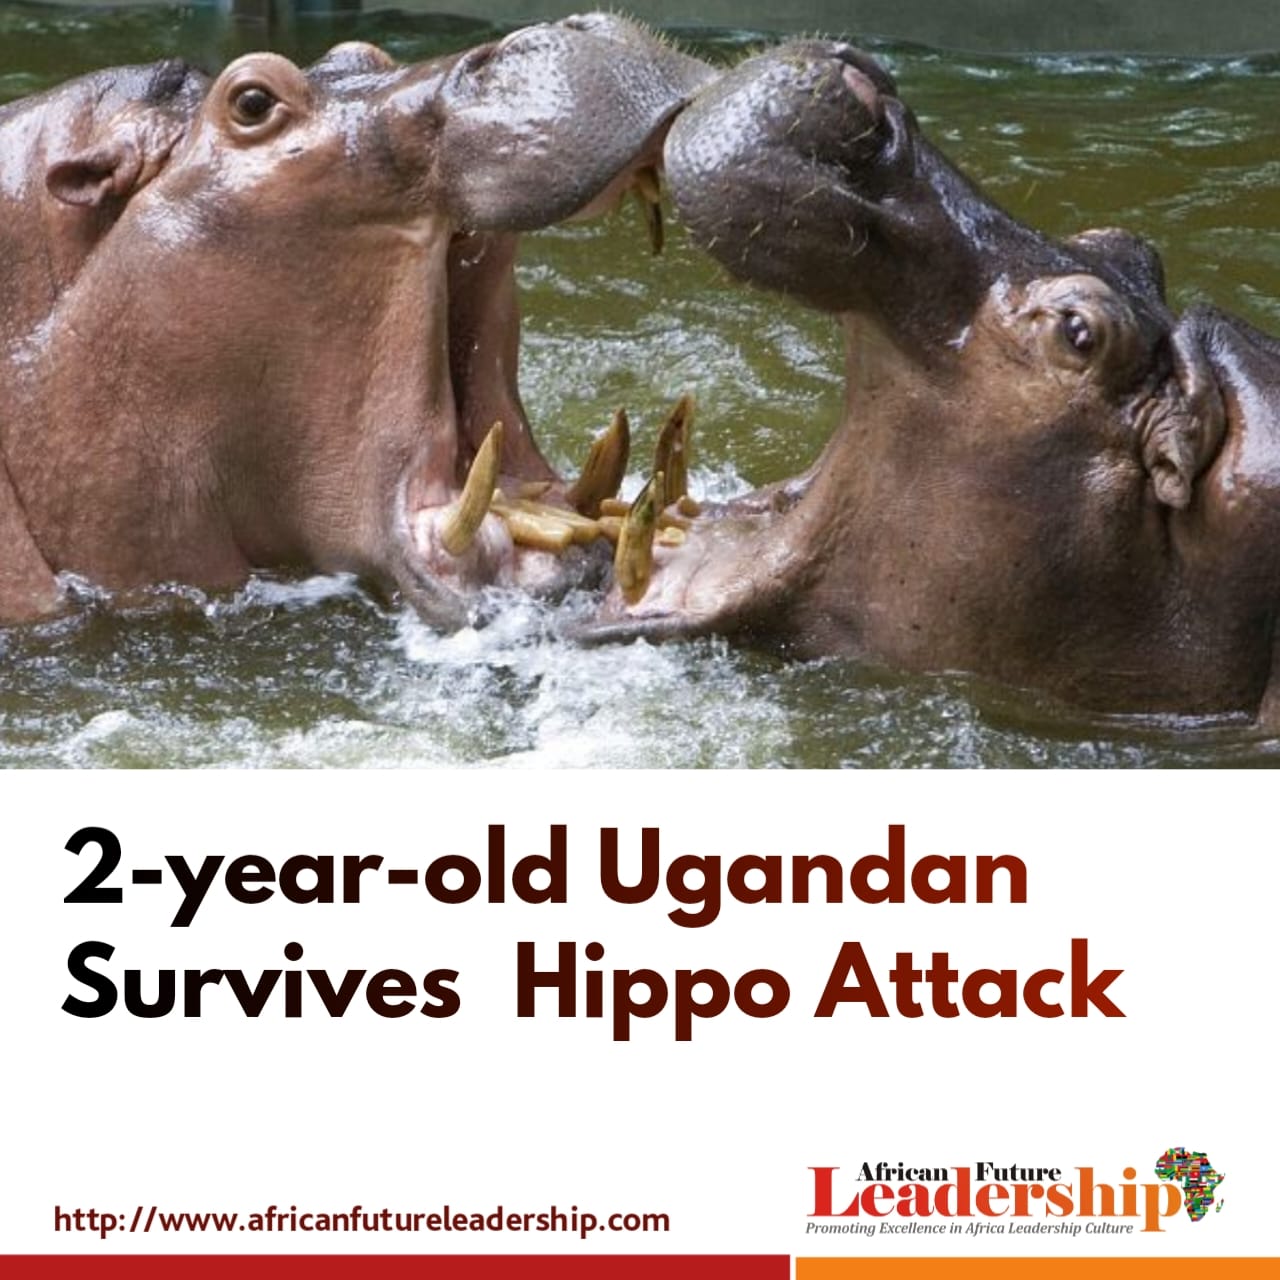 2-year-old Ugandan Survives Hippo Attack